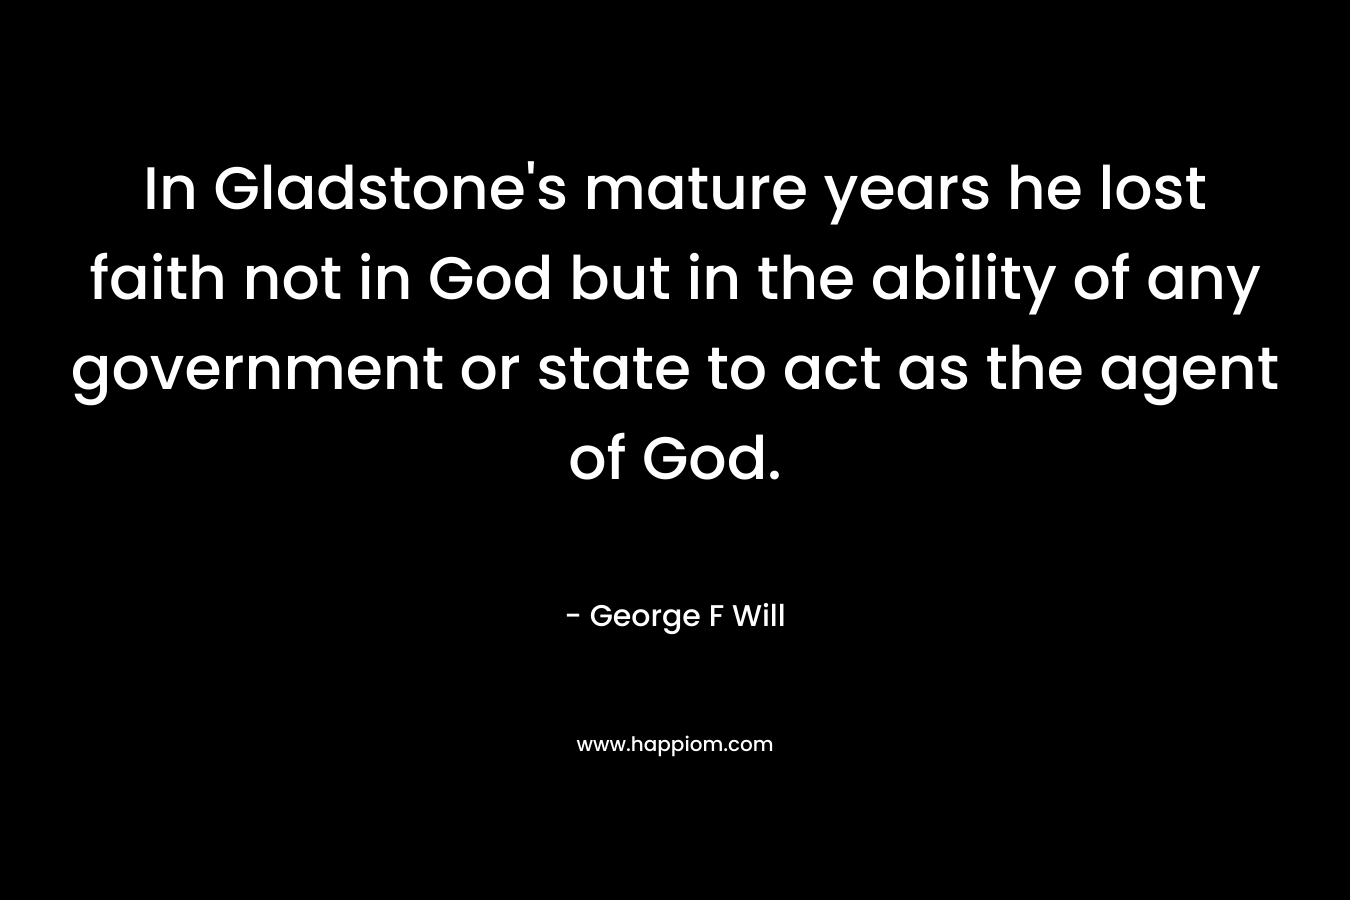 In Gladstone's mature years he lost faith not in God but in the ability of any government or state to act as the agent of God.